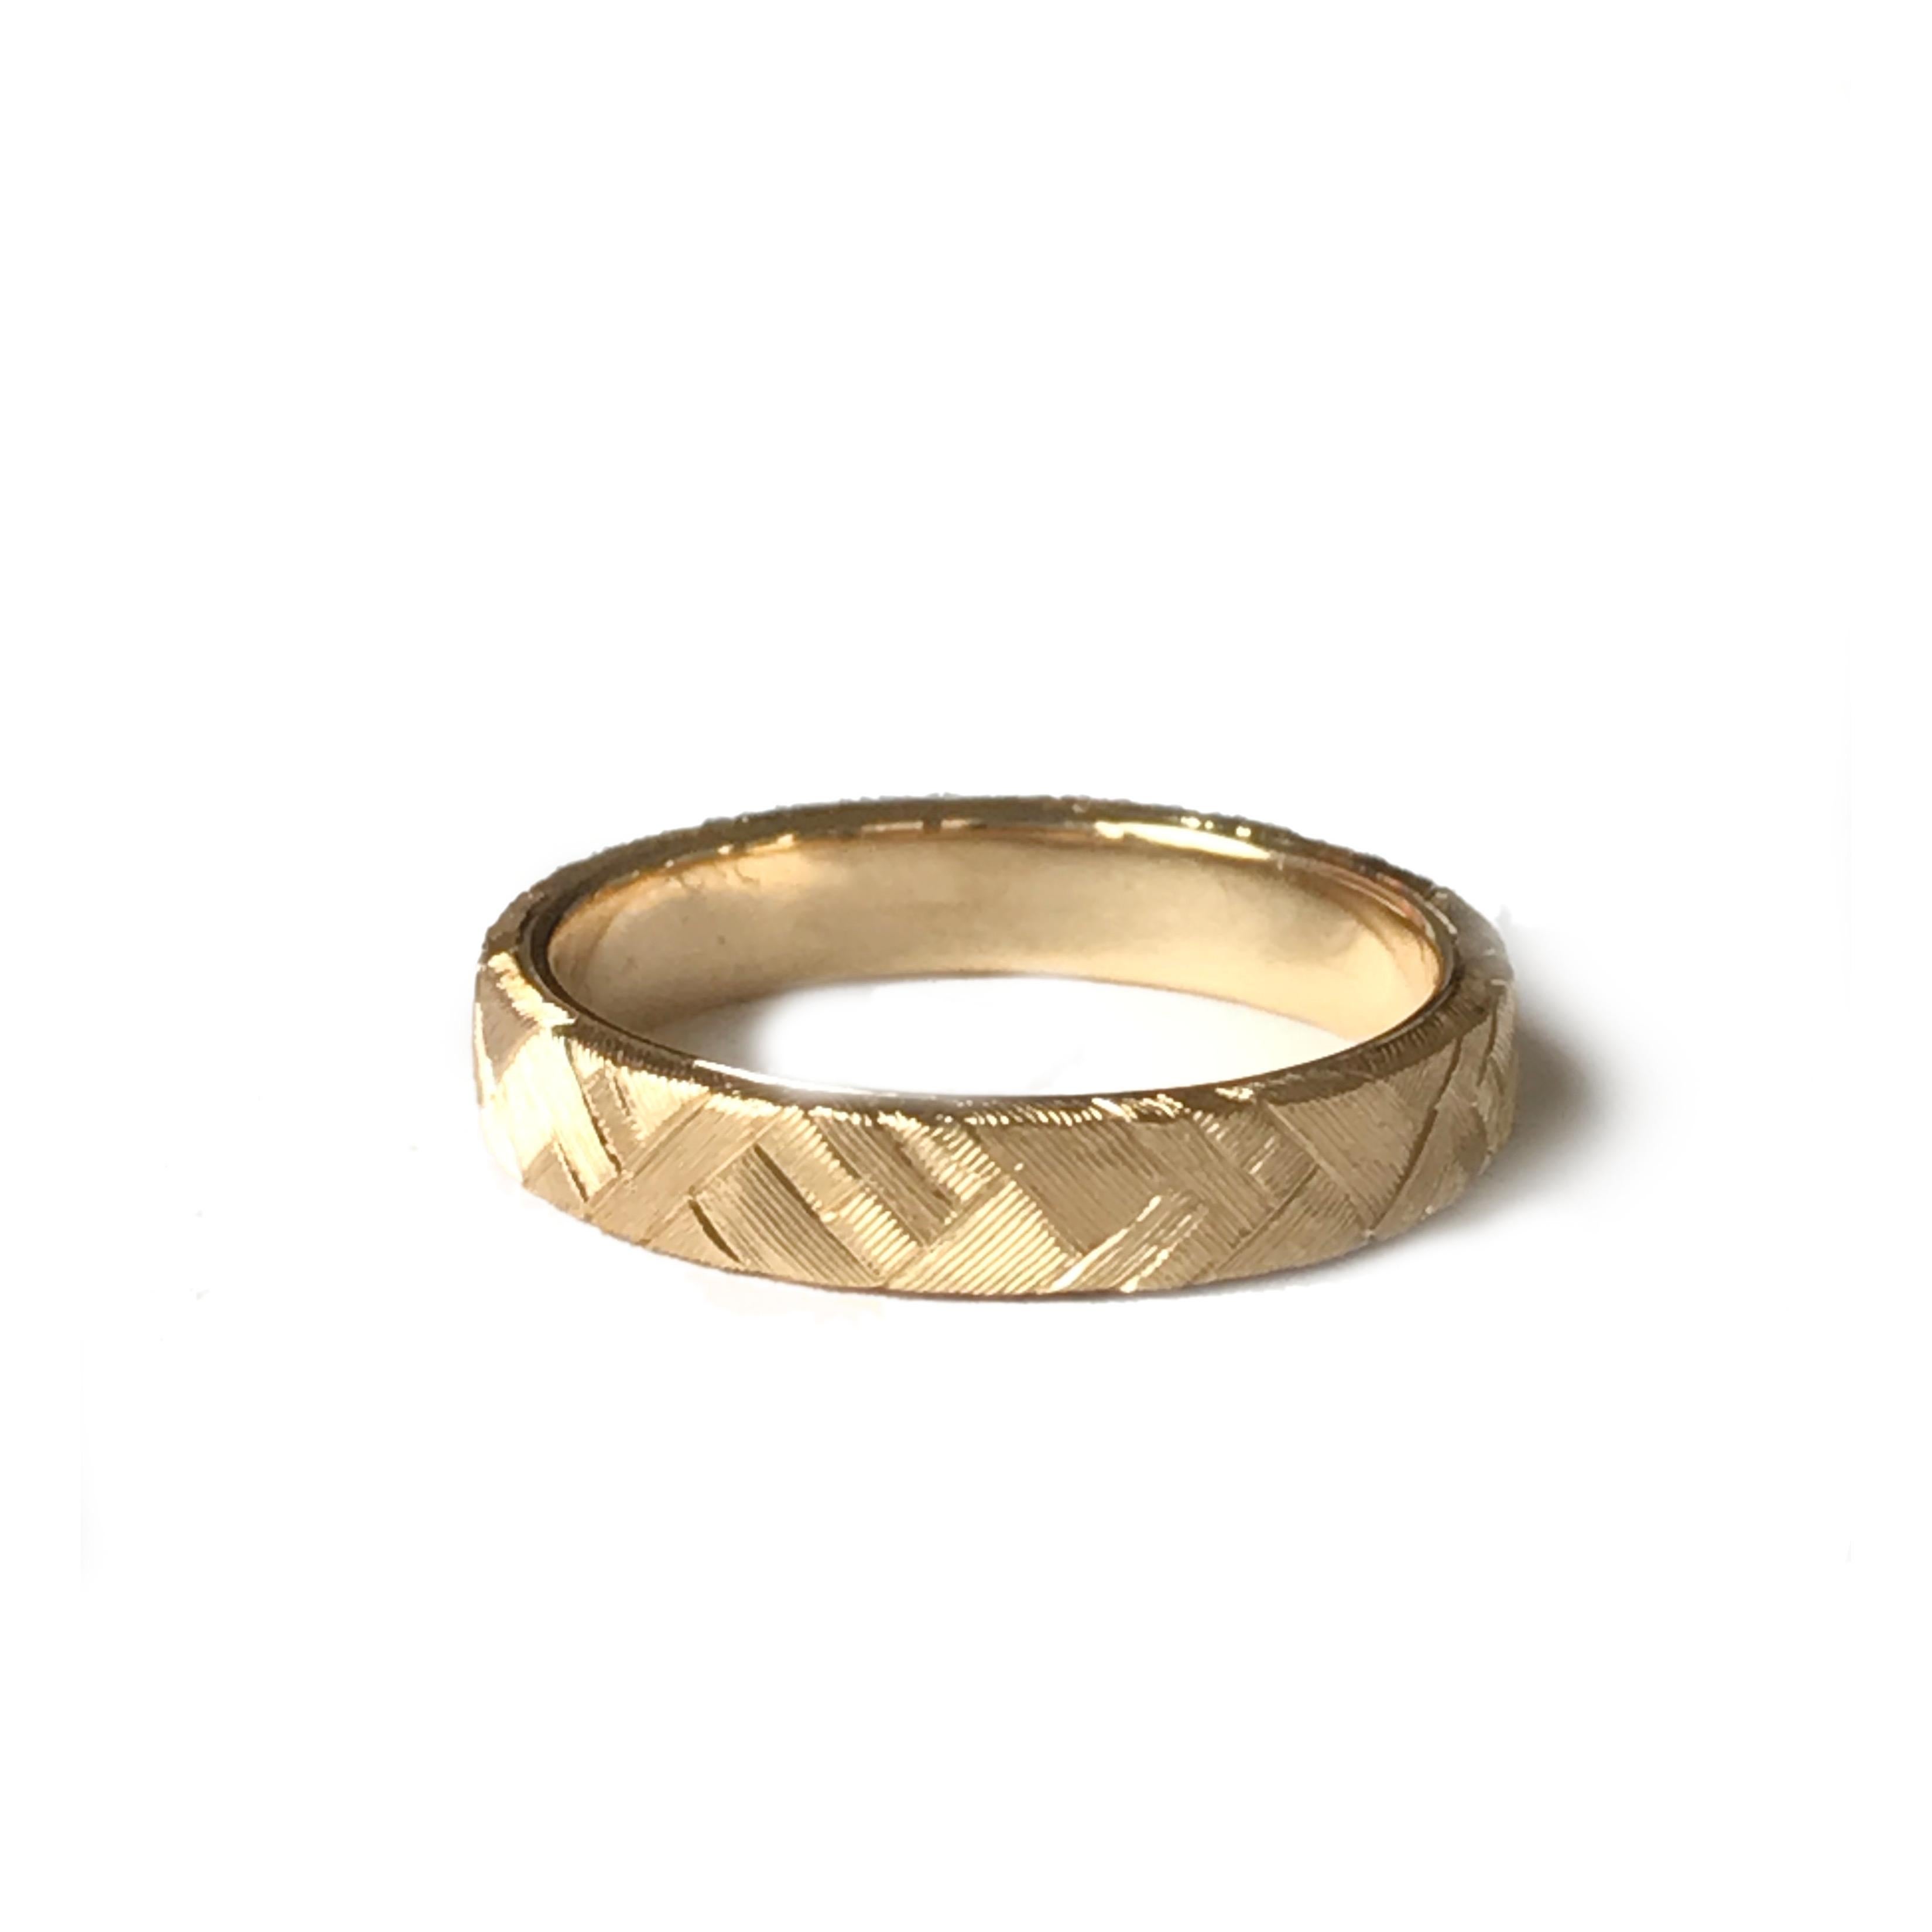 Dalben Hand Engraved Small Gold Band Ring In New Condition For Sale In Como, IT